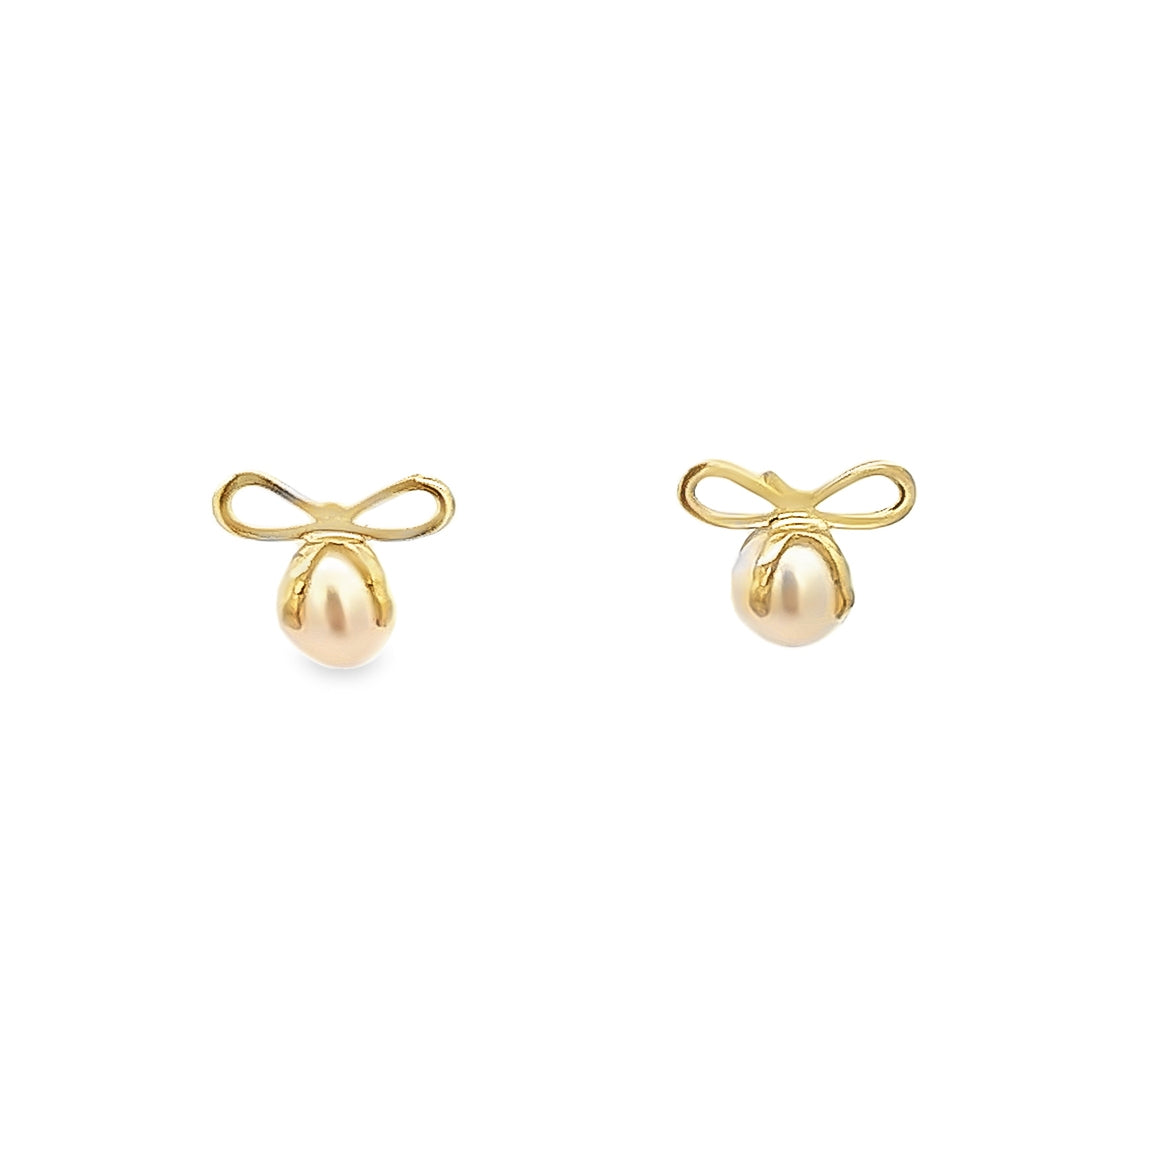 14K GOLD BOW AND PEARL EARRINGS